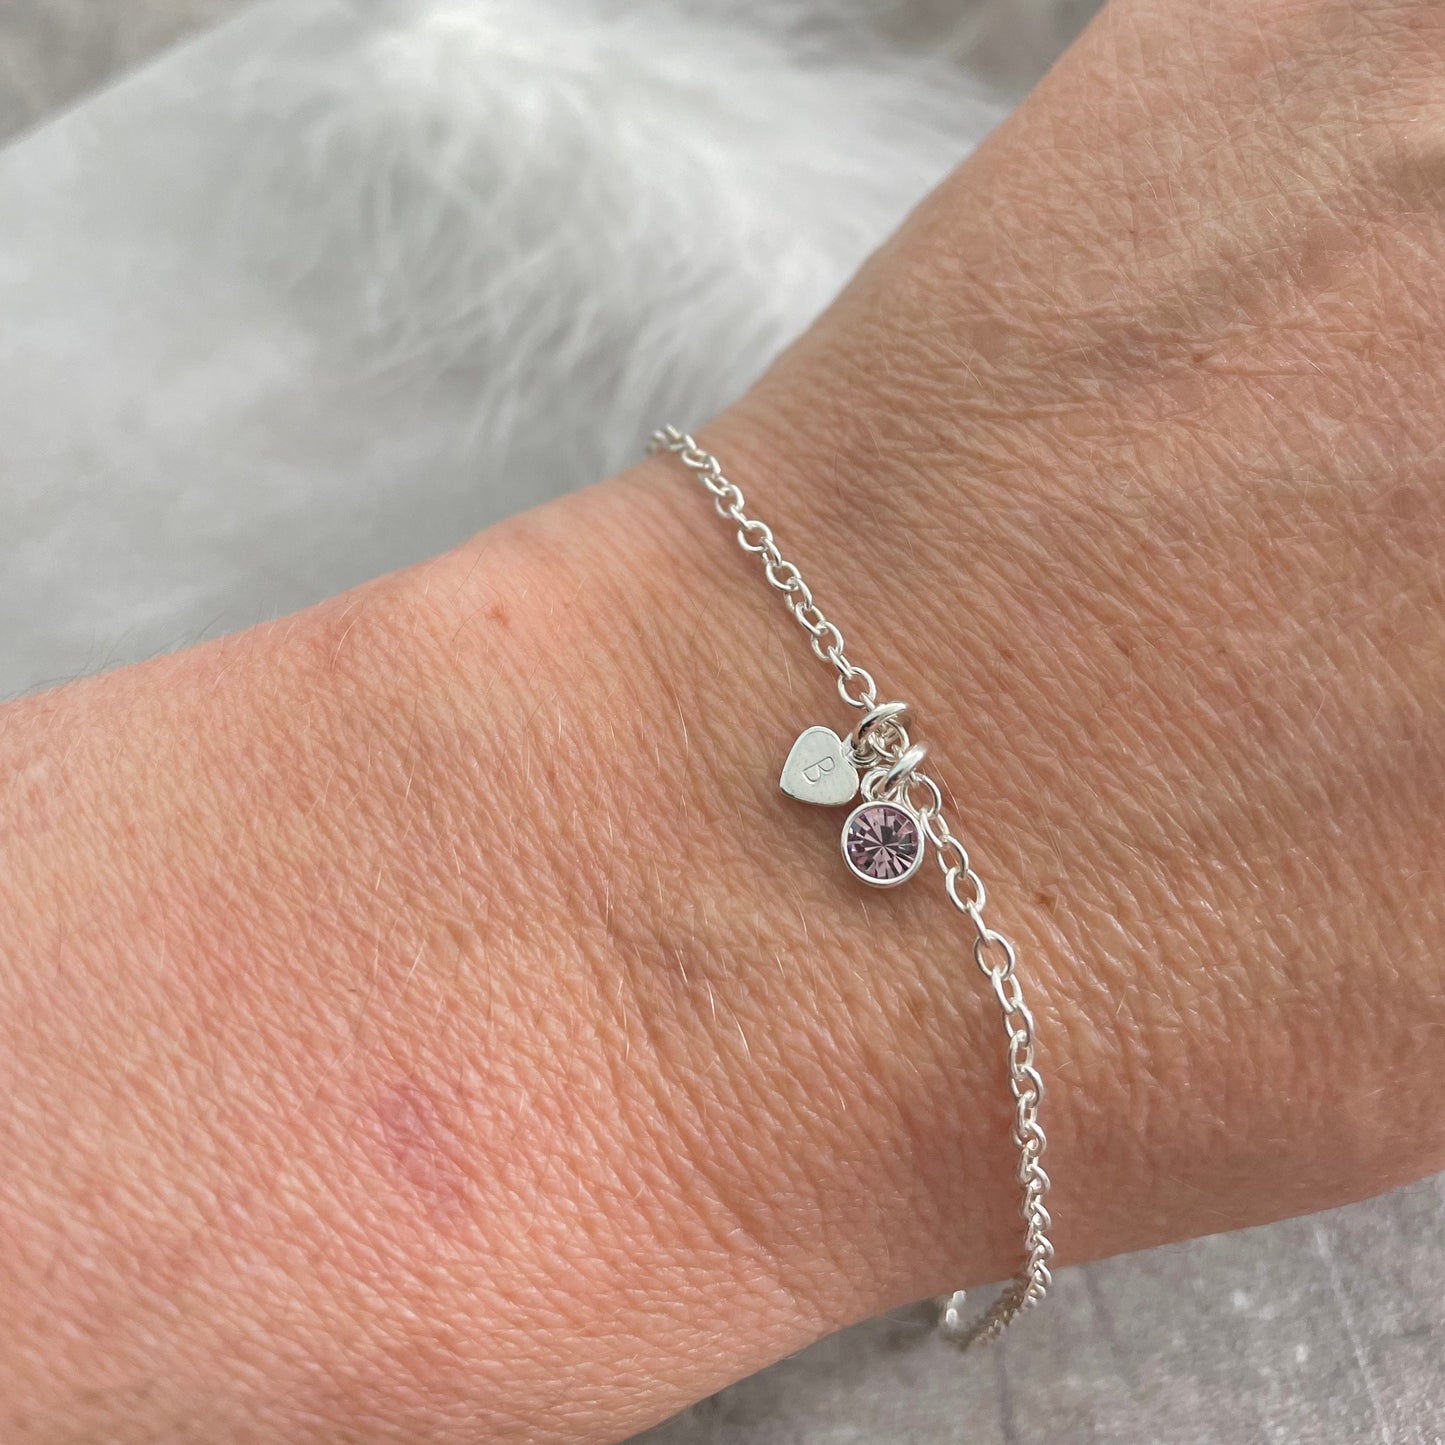 Birthstone & Tiny Initial Bracelet on Chain, Dainty Personalised Sterling Silver Jewellery